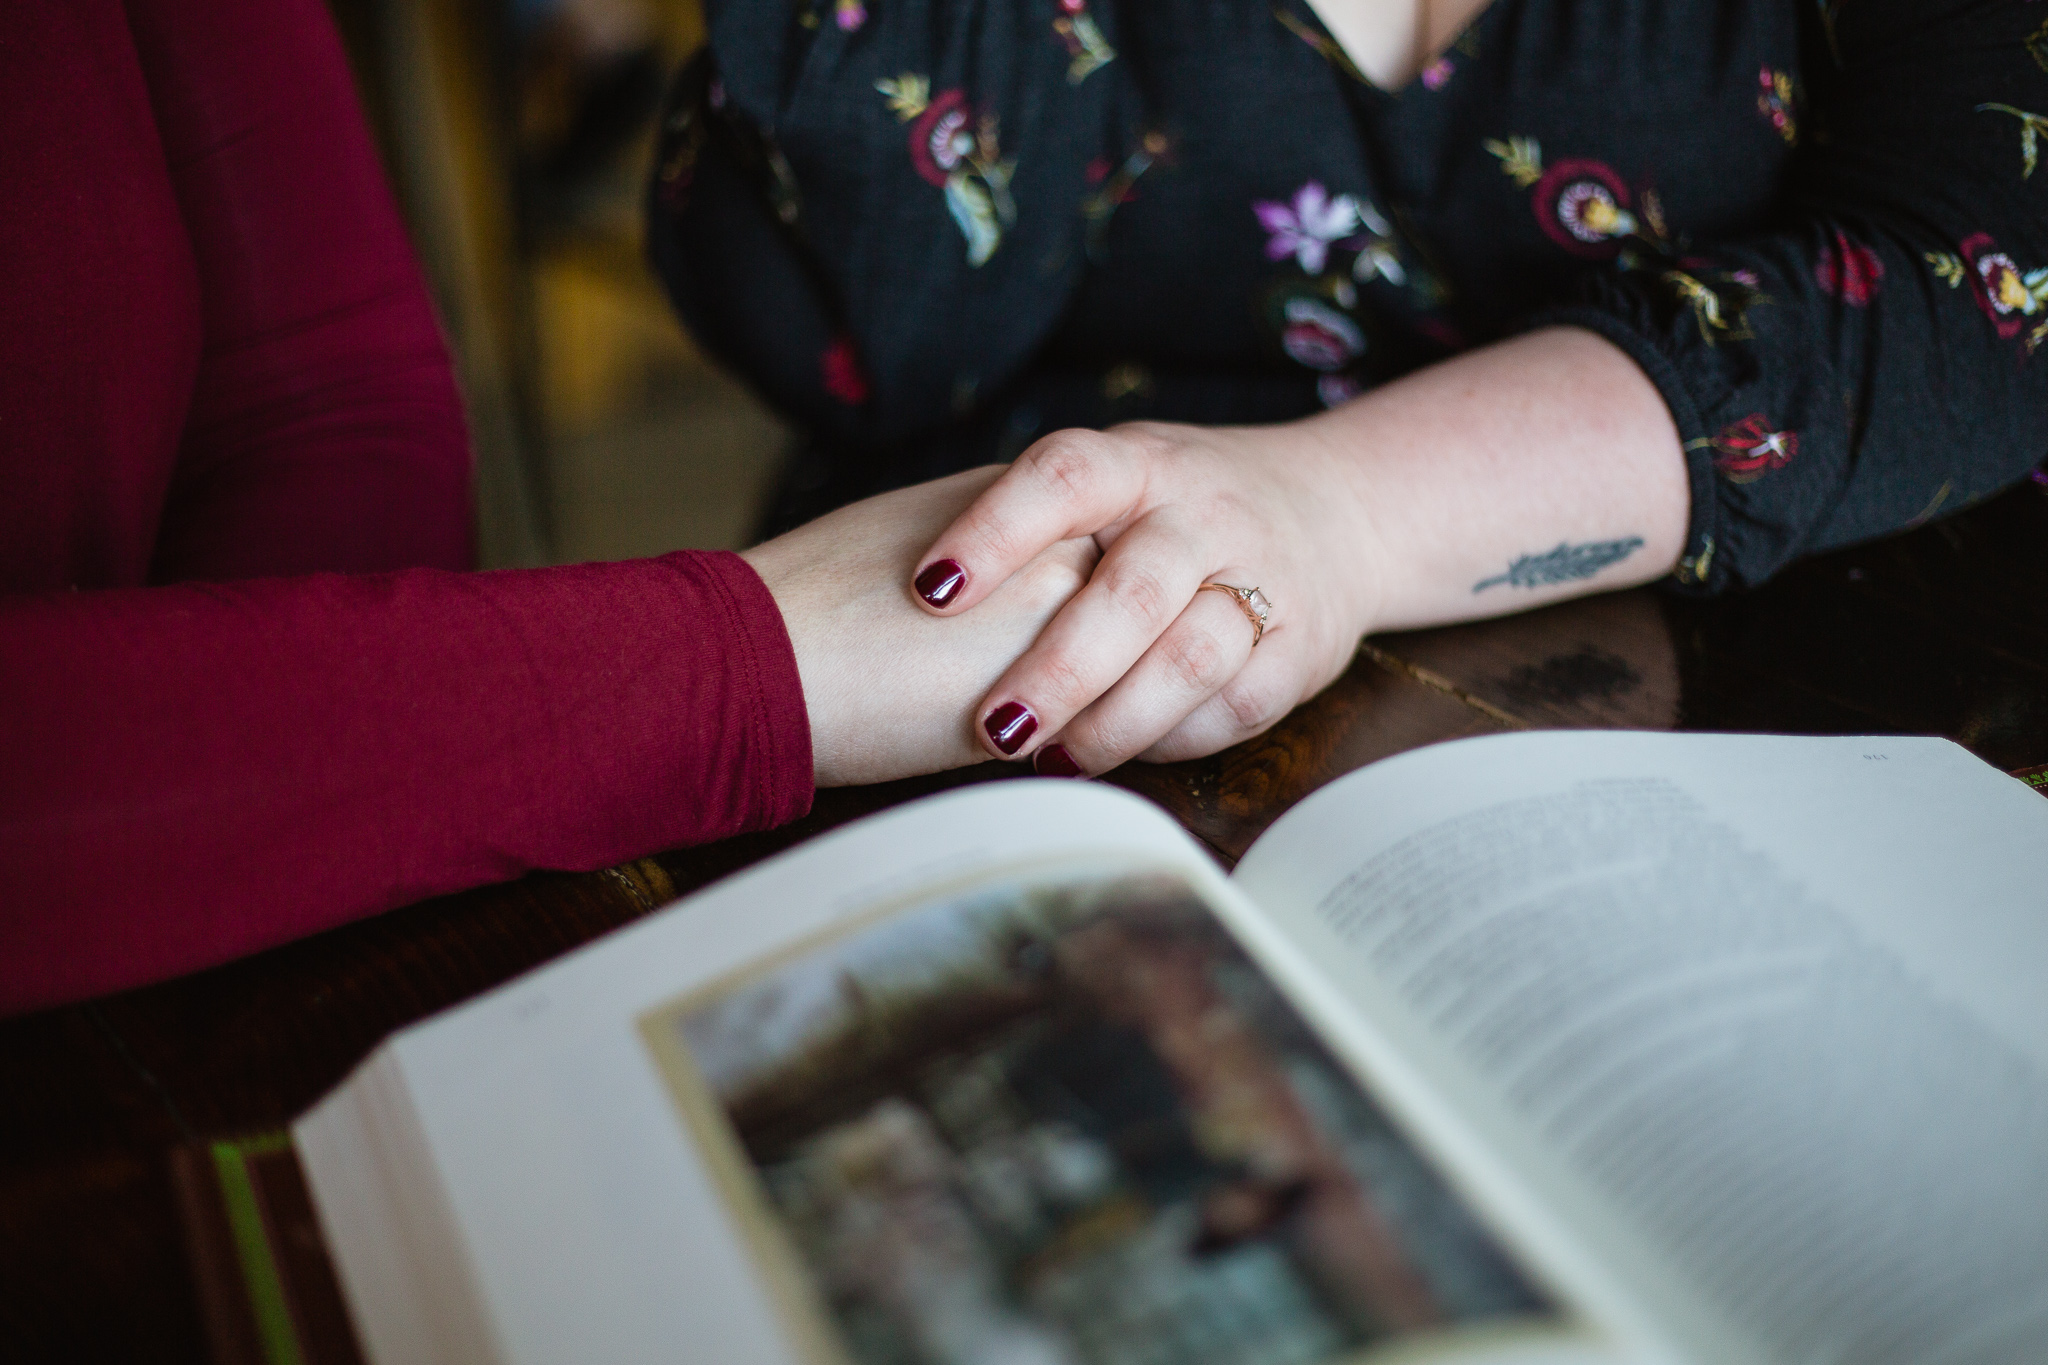 Couple holding hands next to book during engagement session at coffee shop.